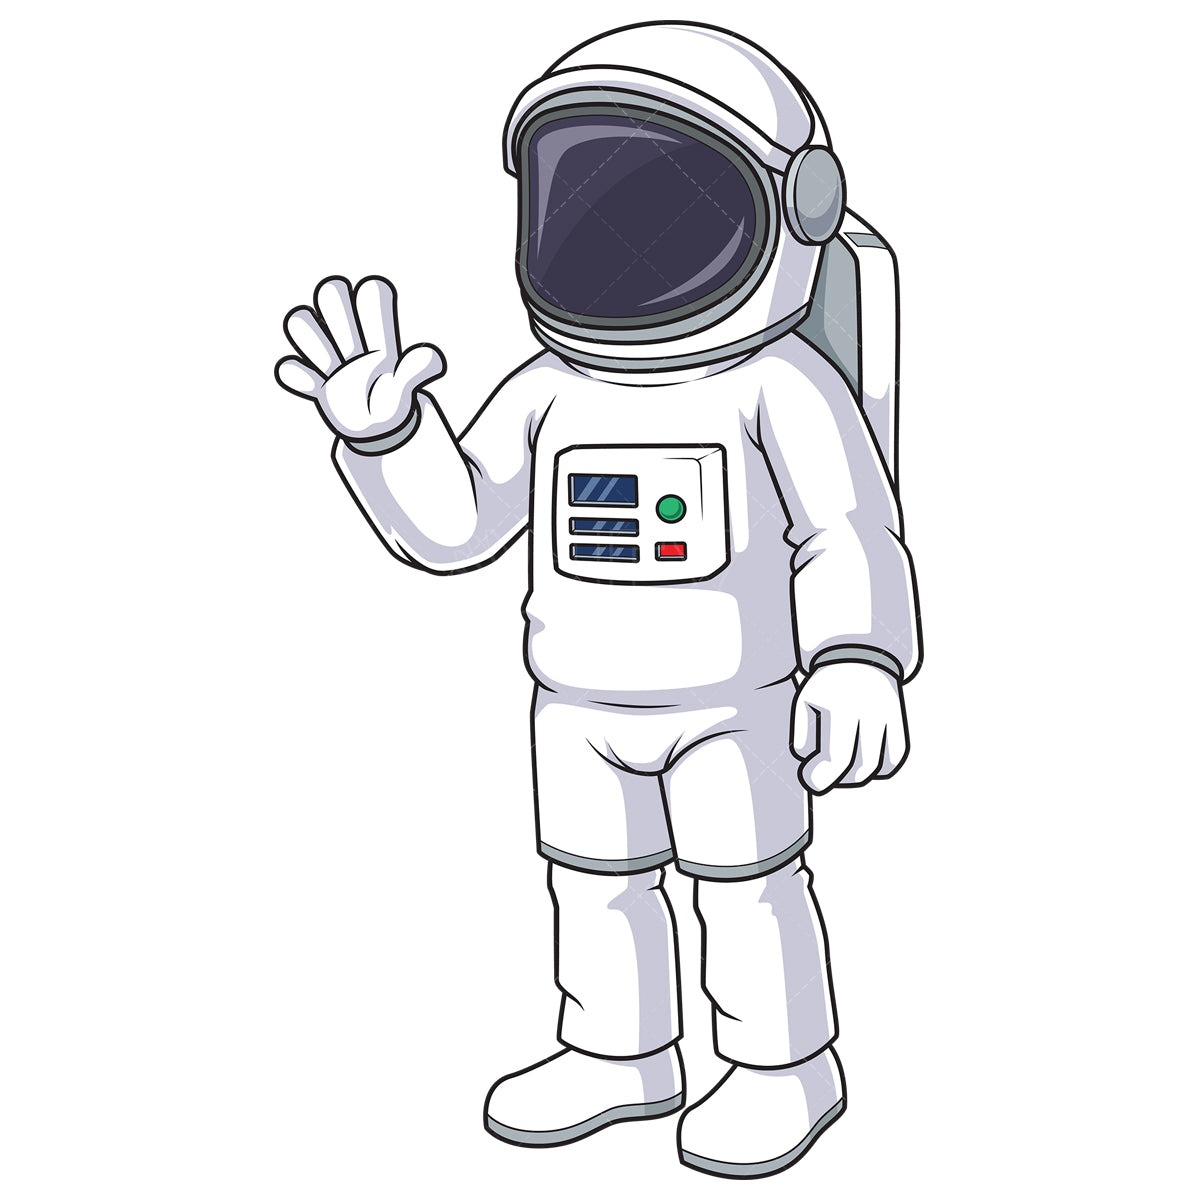 Royalty-free stock vector illustration of an astronaut in suit waving.